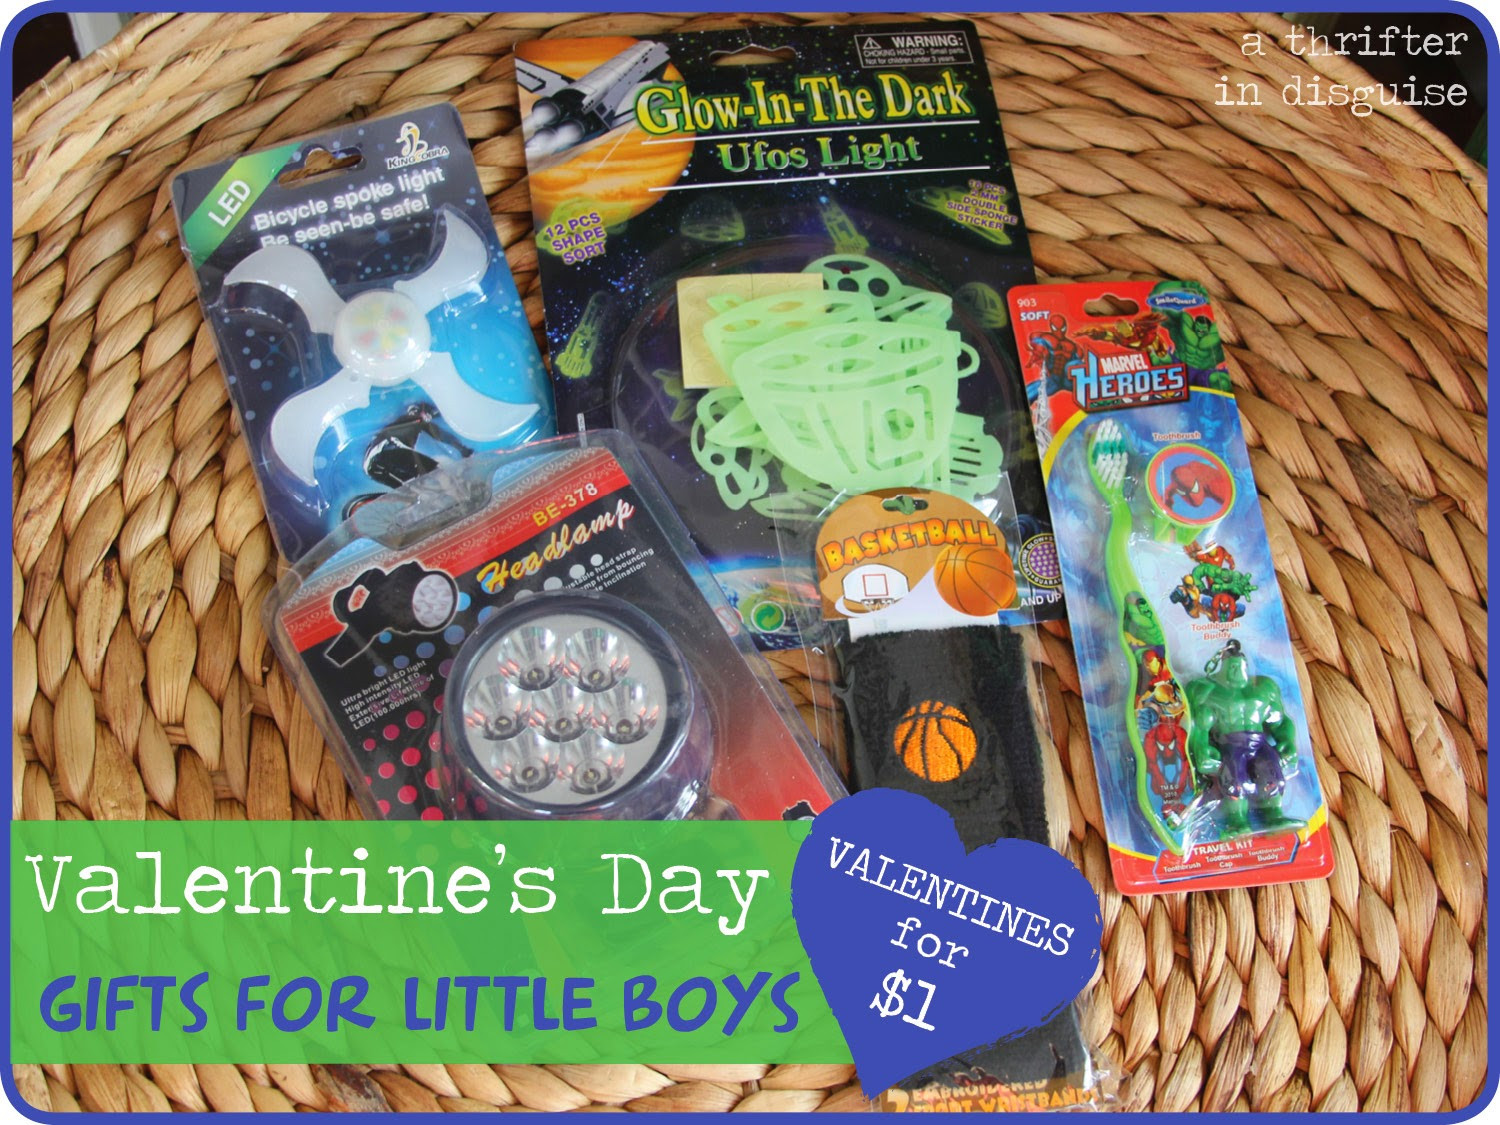 Cheap Gift Ideas For Boys
 A Thrifter in Disguise Valentine s Gifts for the Little Guys